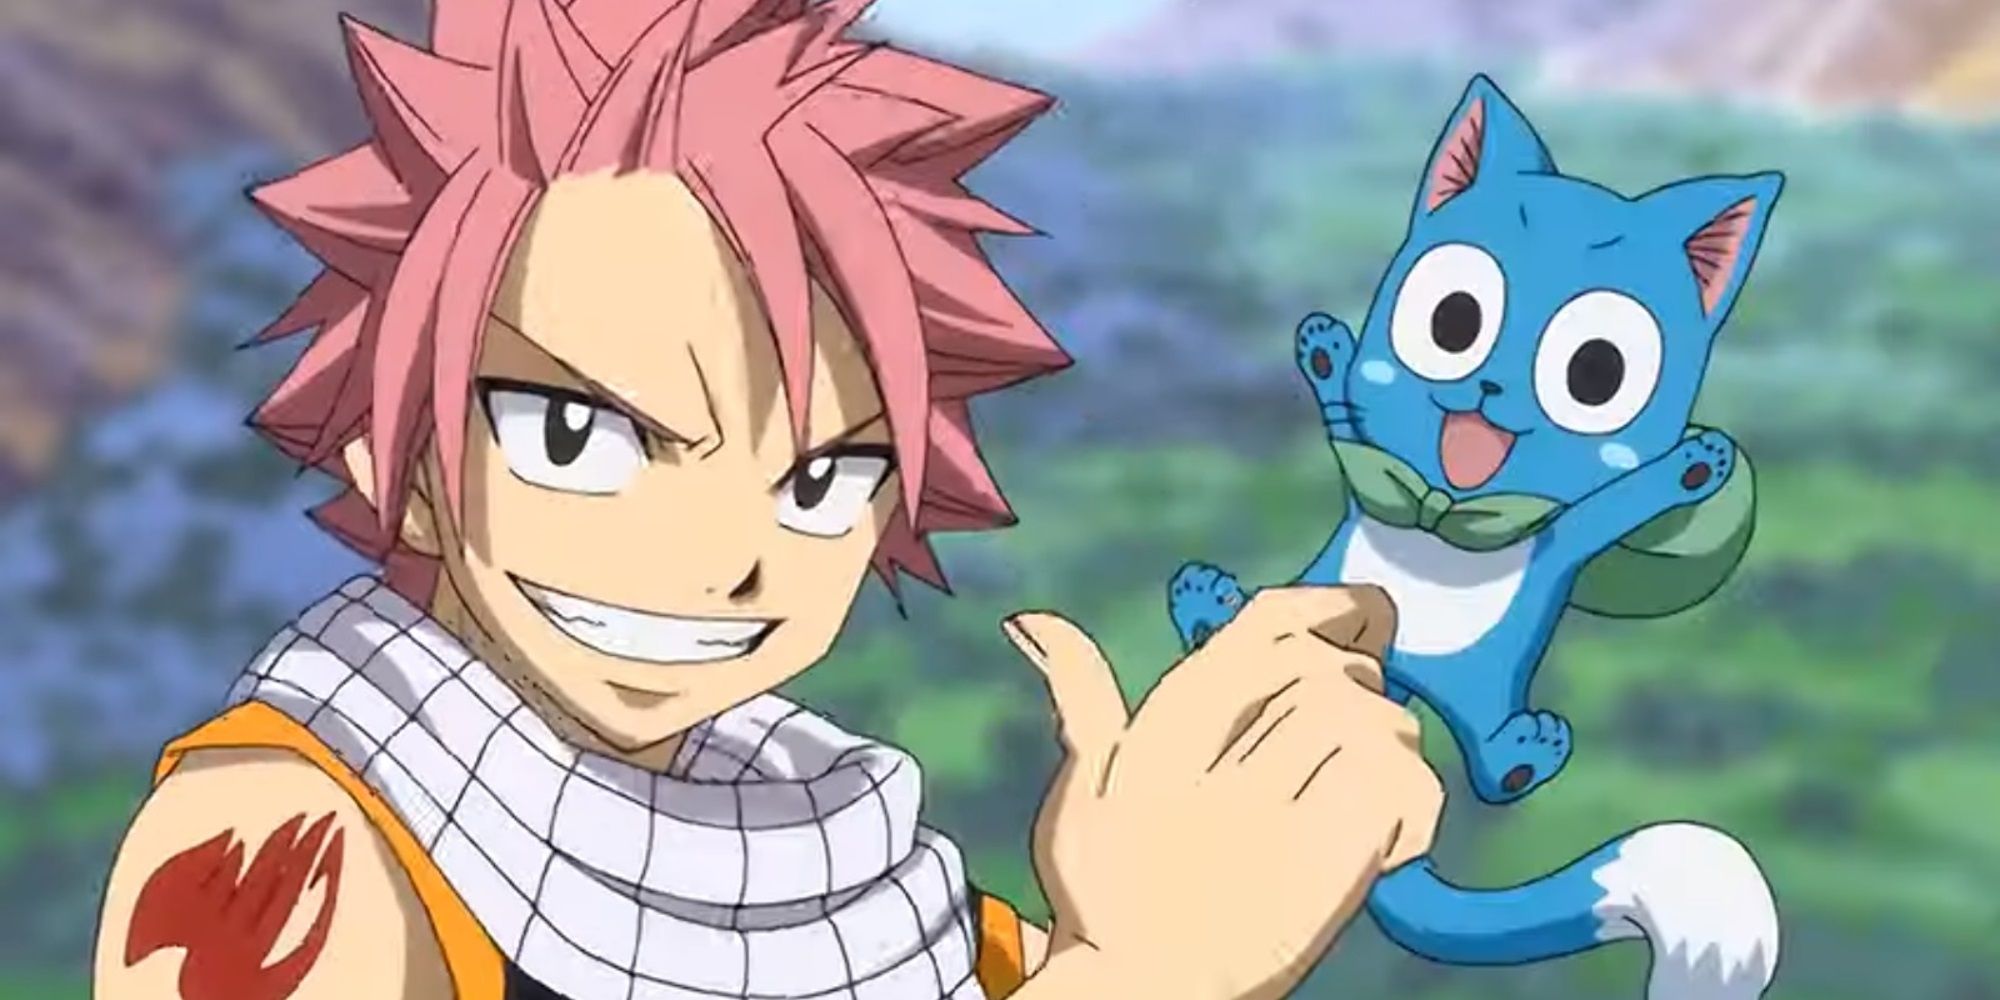 Natsu and Happy smiling in the first opening of Fairy Tail